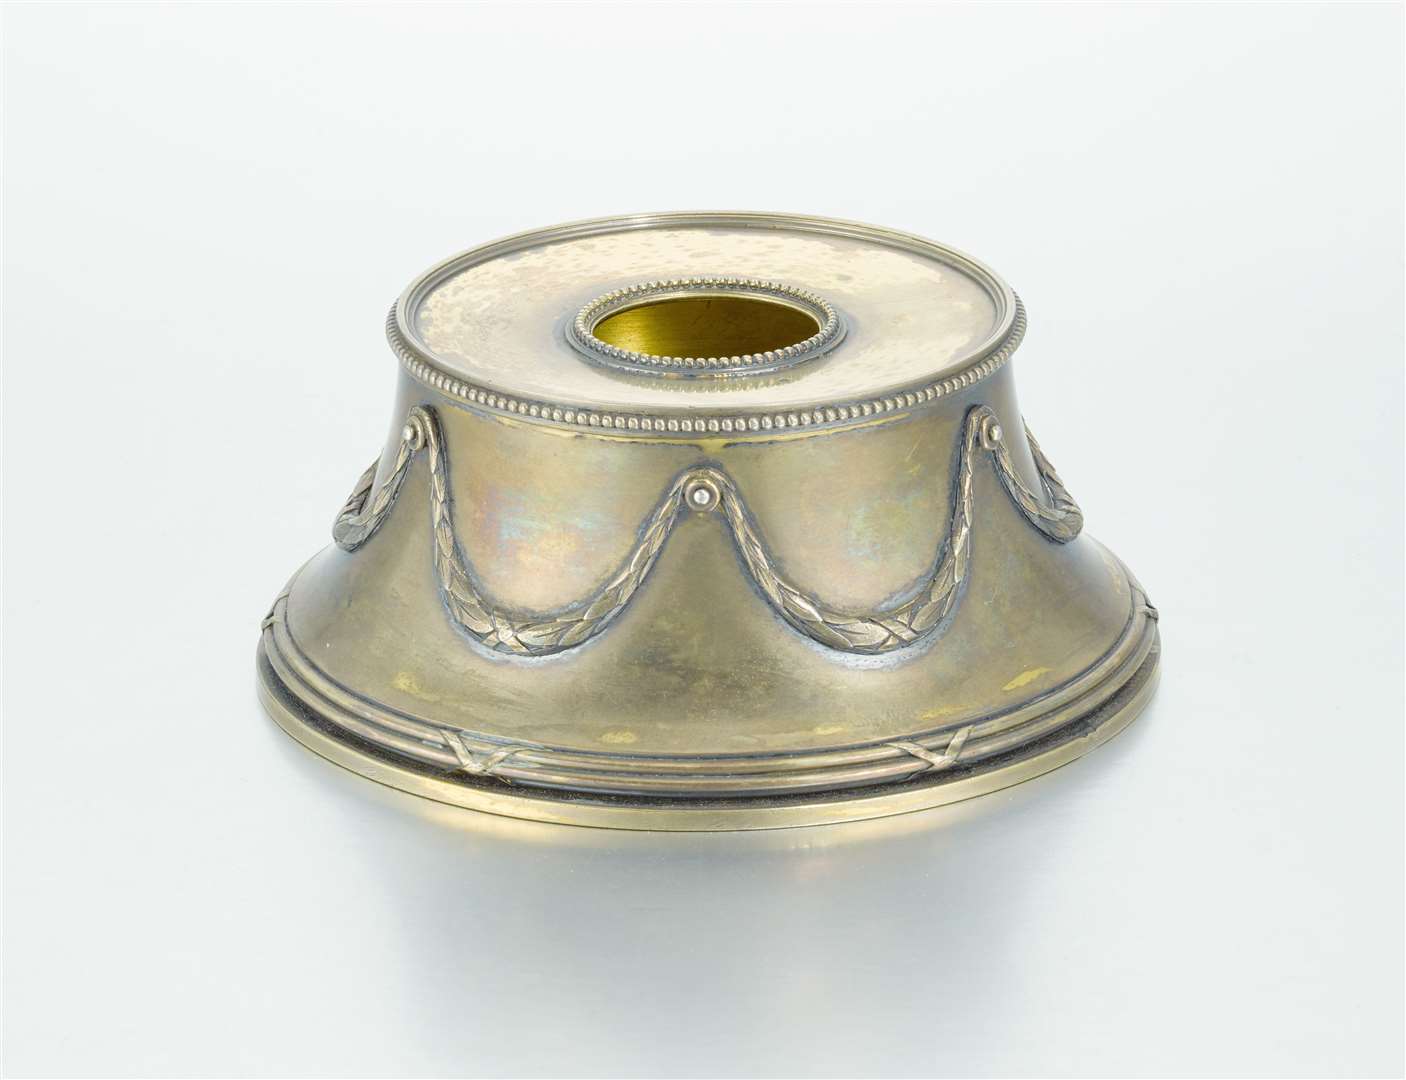 A Fabergé silver-gilt inkwell, inscribed with a personal message to the Countess' husband, has an estimate of £4,000 to £6,000